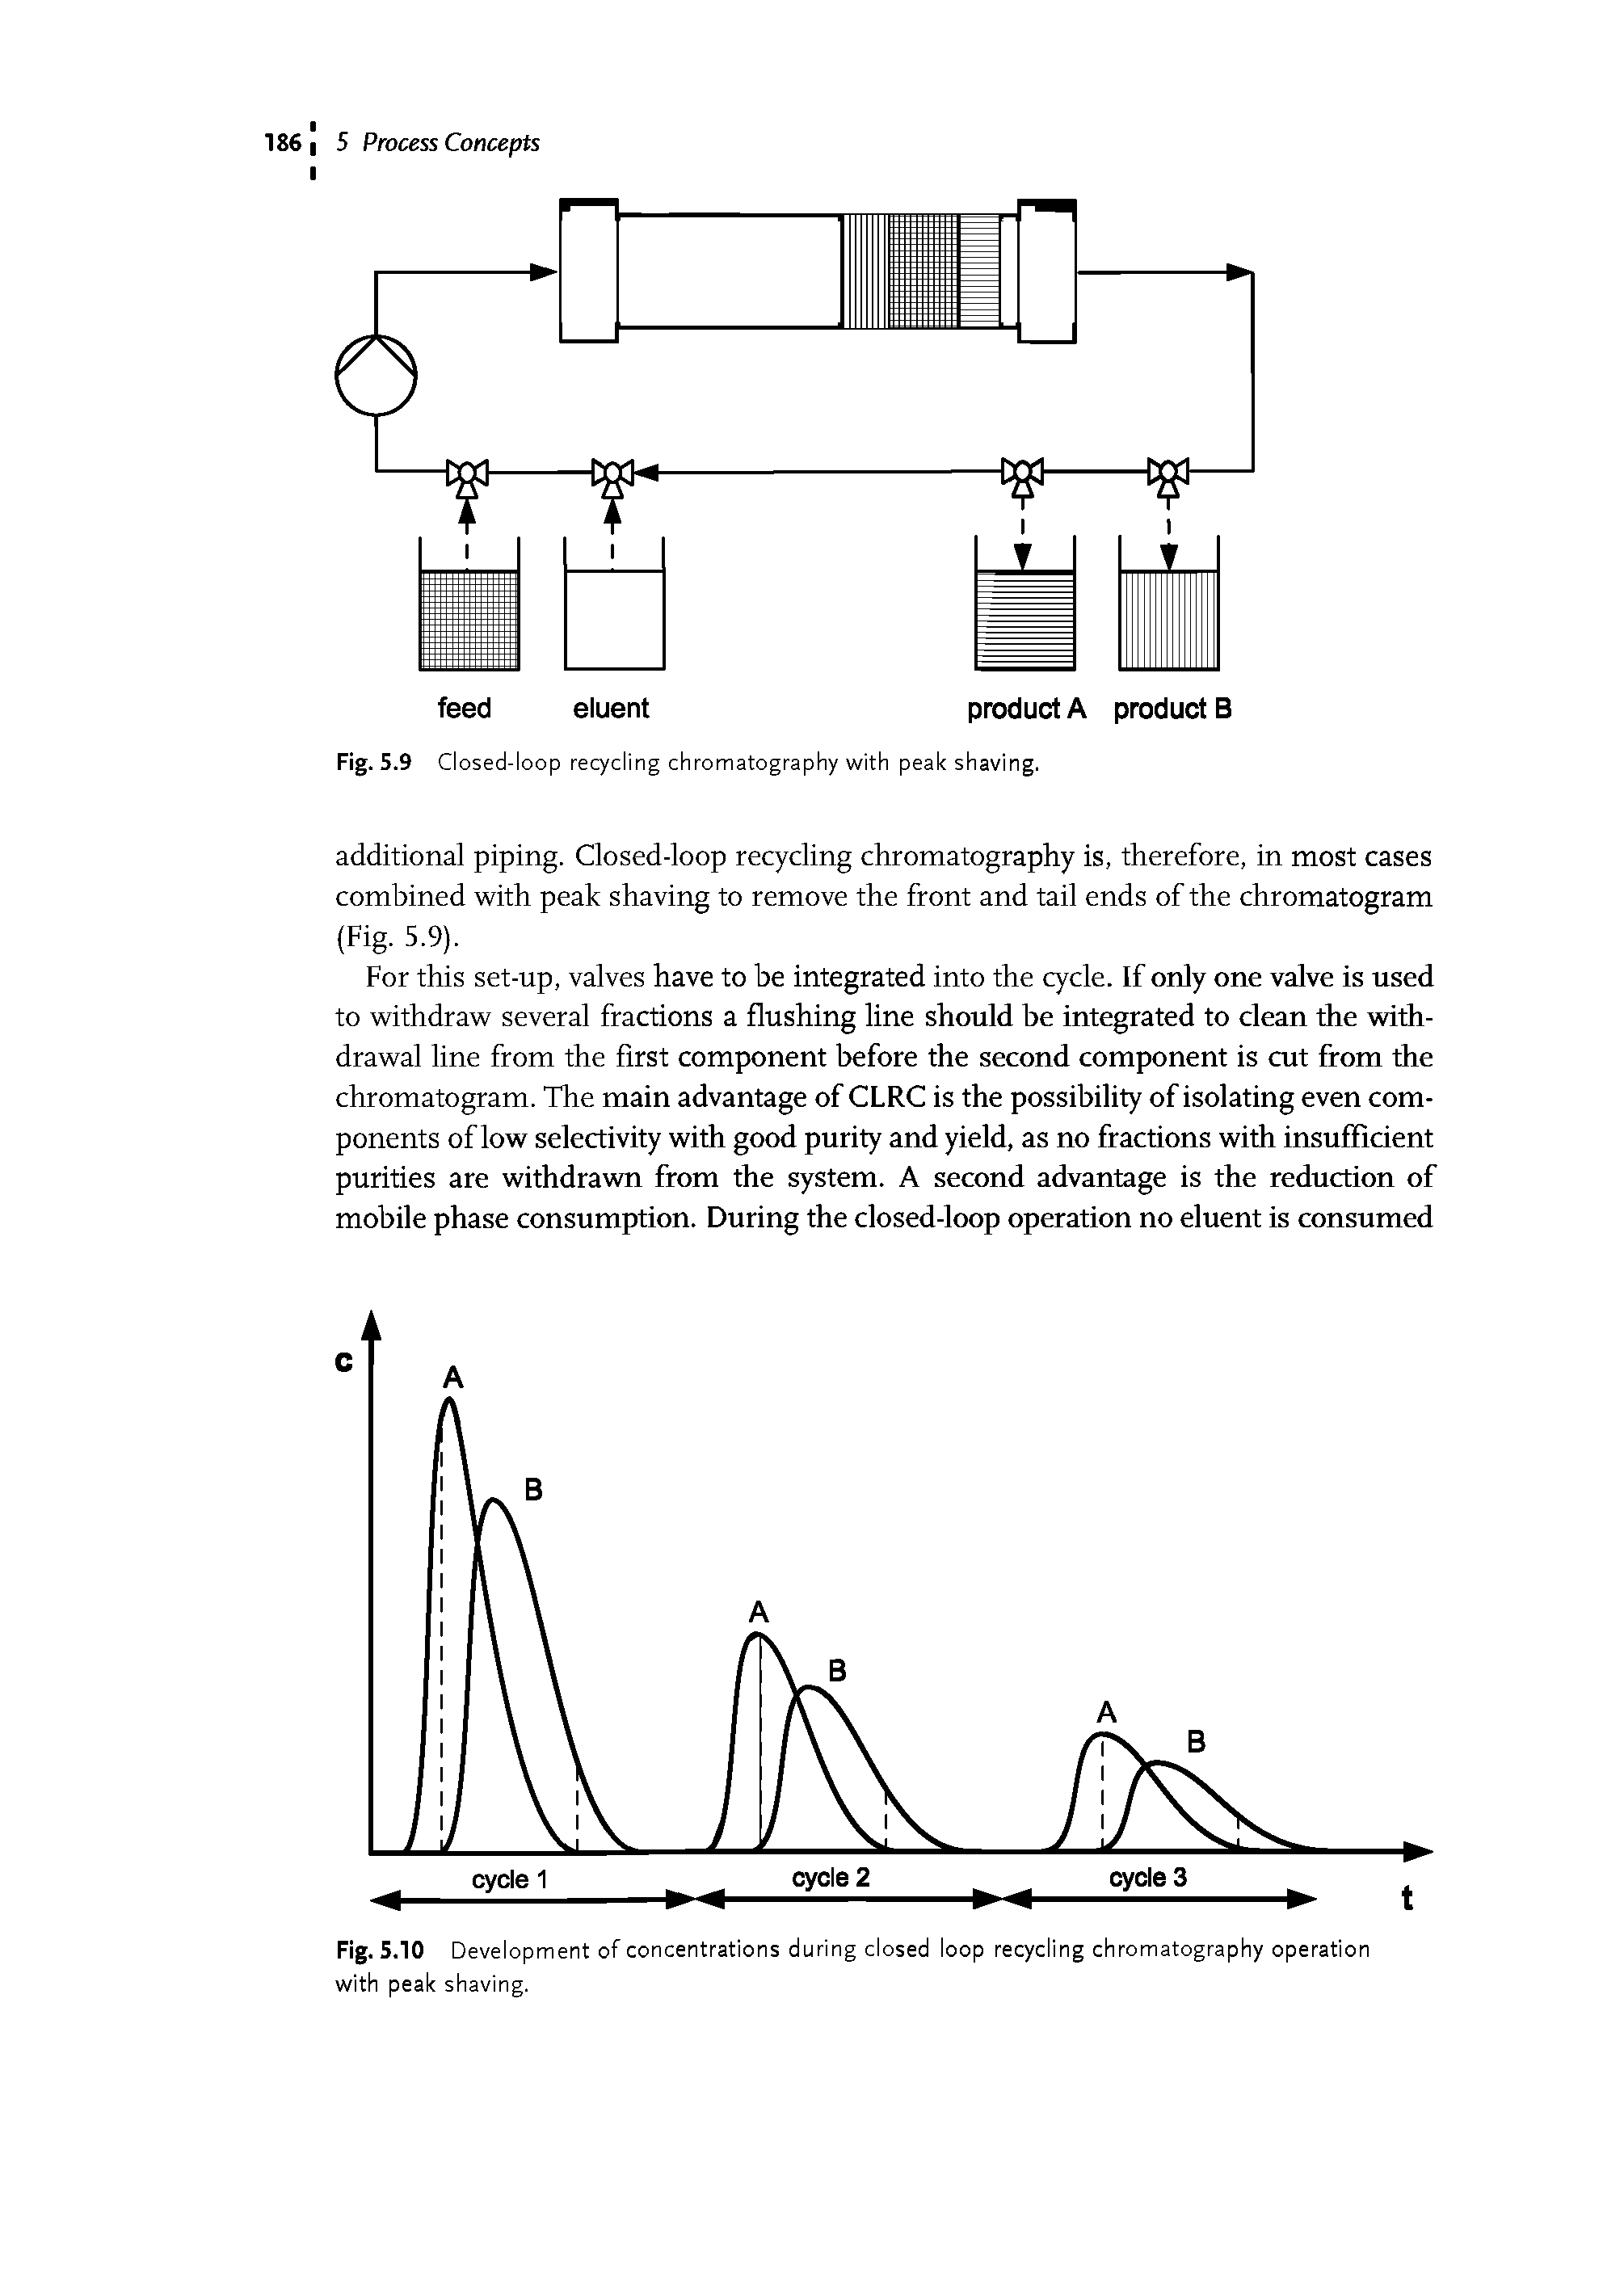 Fig. 5.9 Closed-loop recycling chromatography with peak shaving.